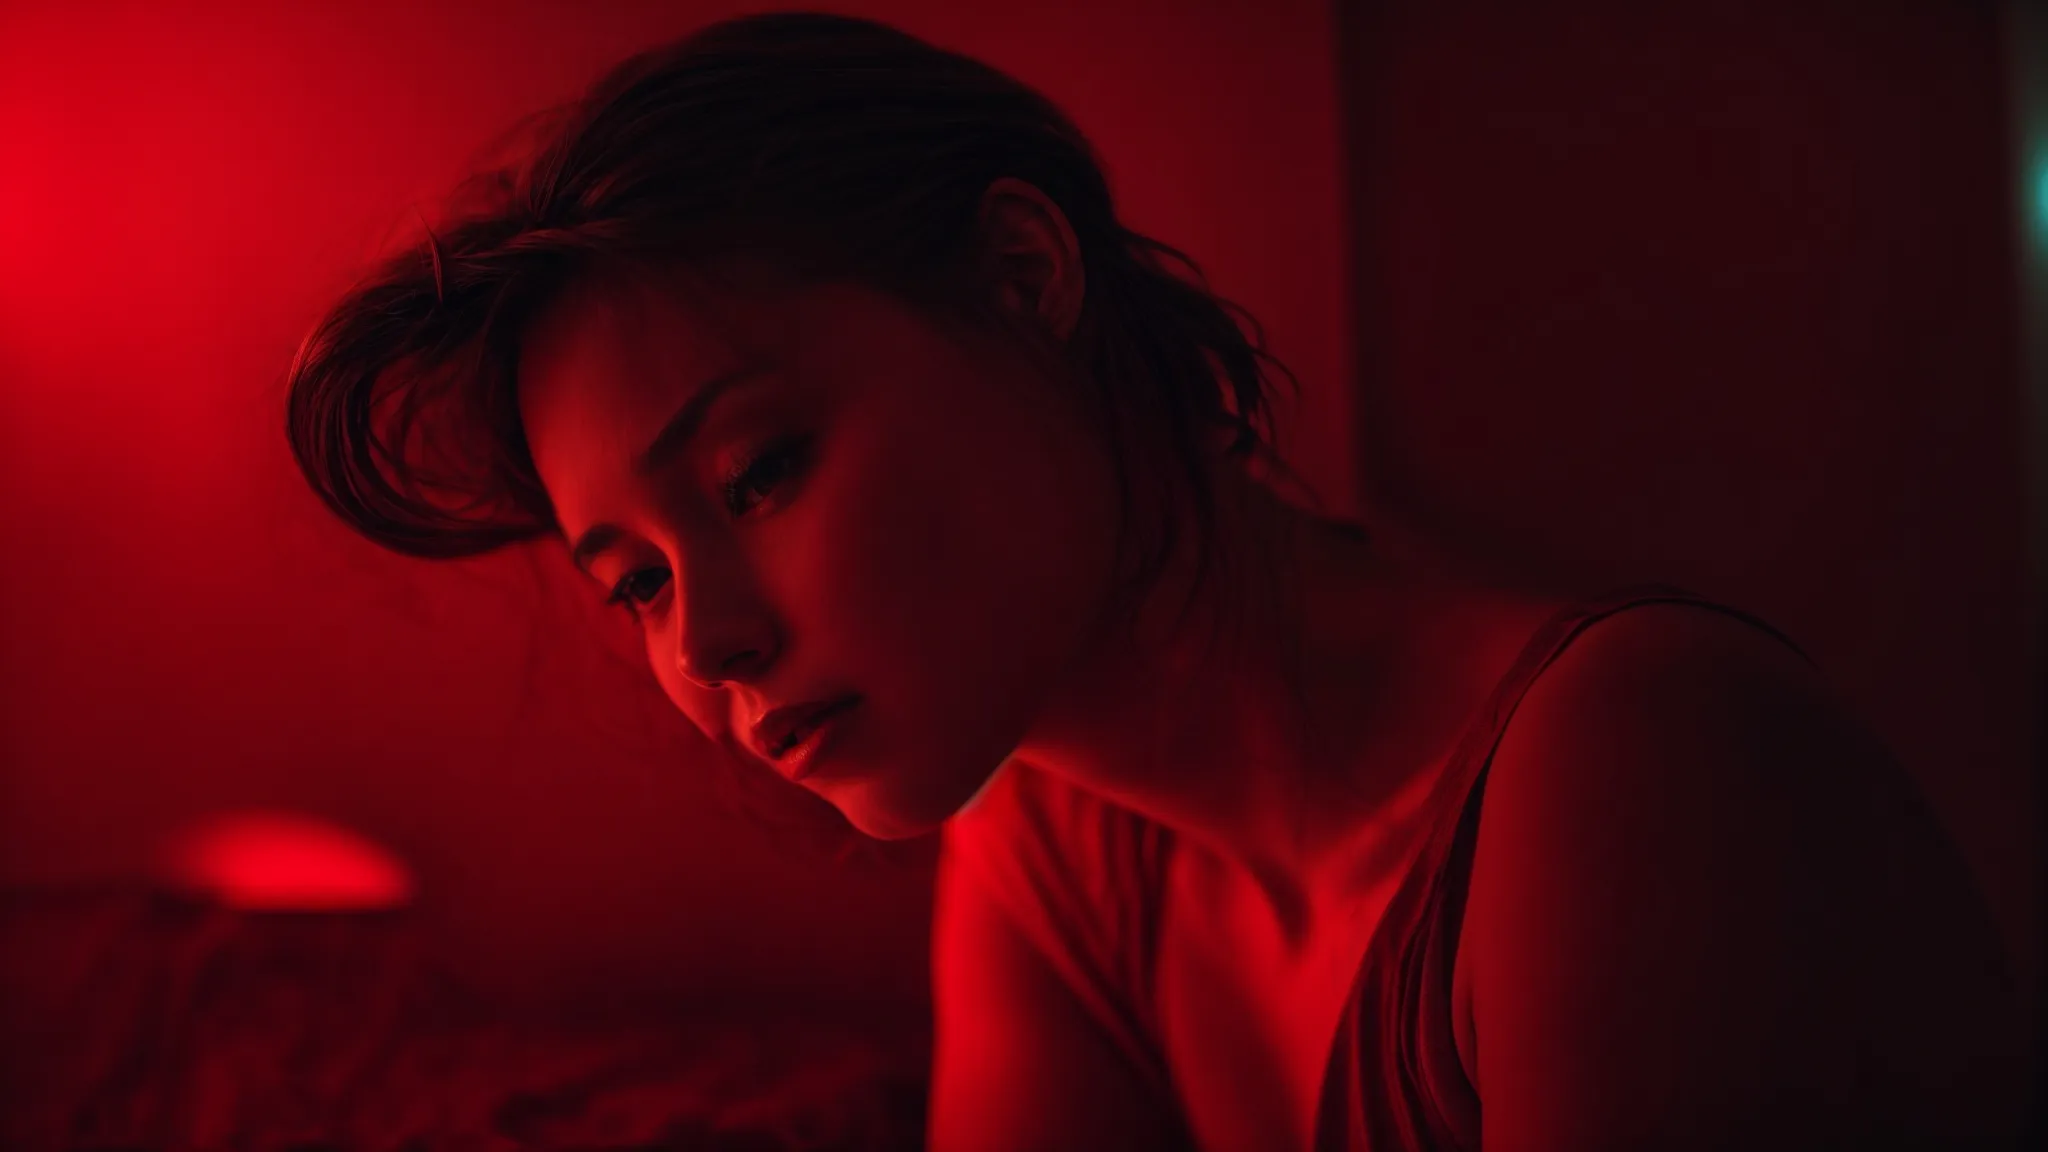 a person relaxes under a glowing red light, their face bathed in its therapeutic radiance.